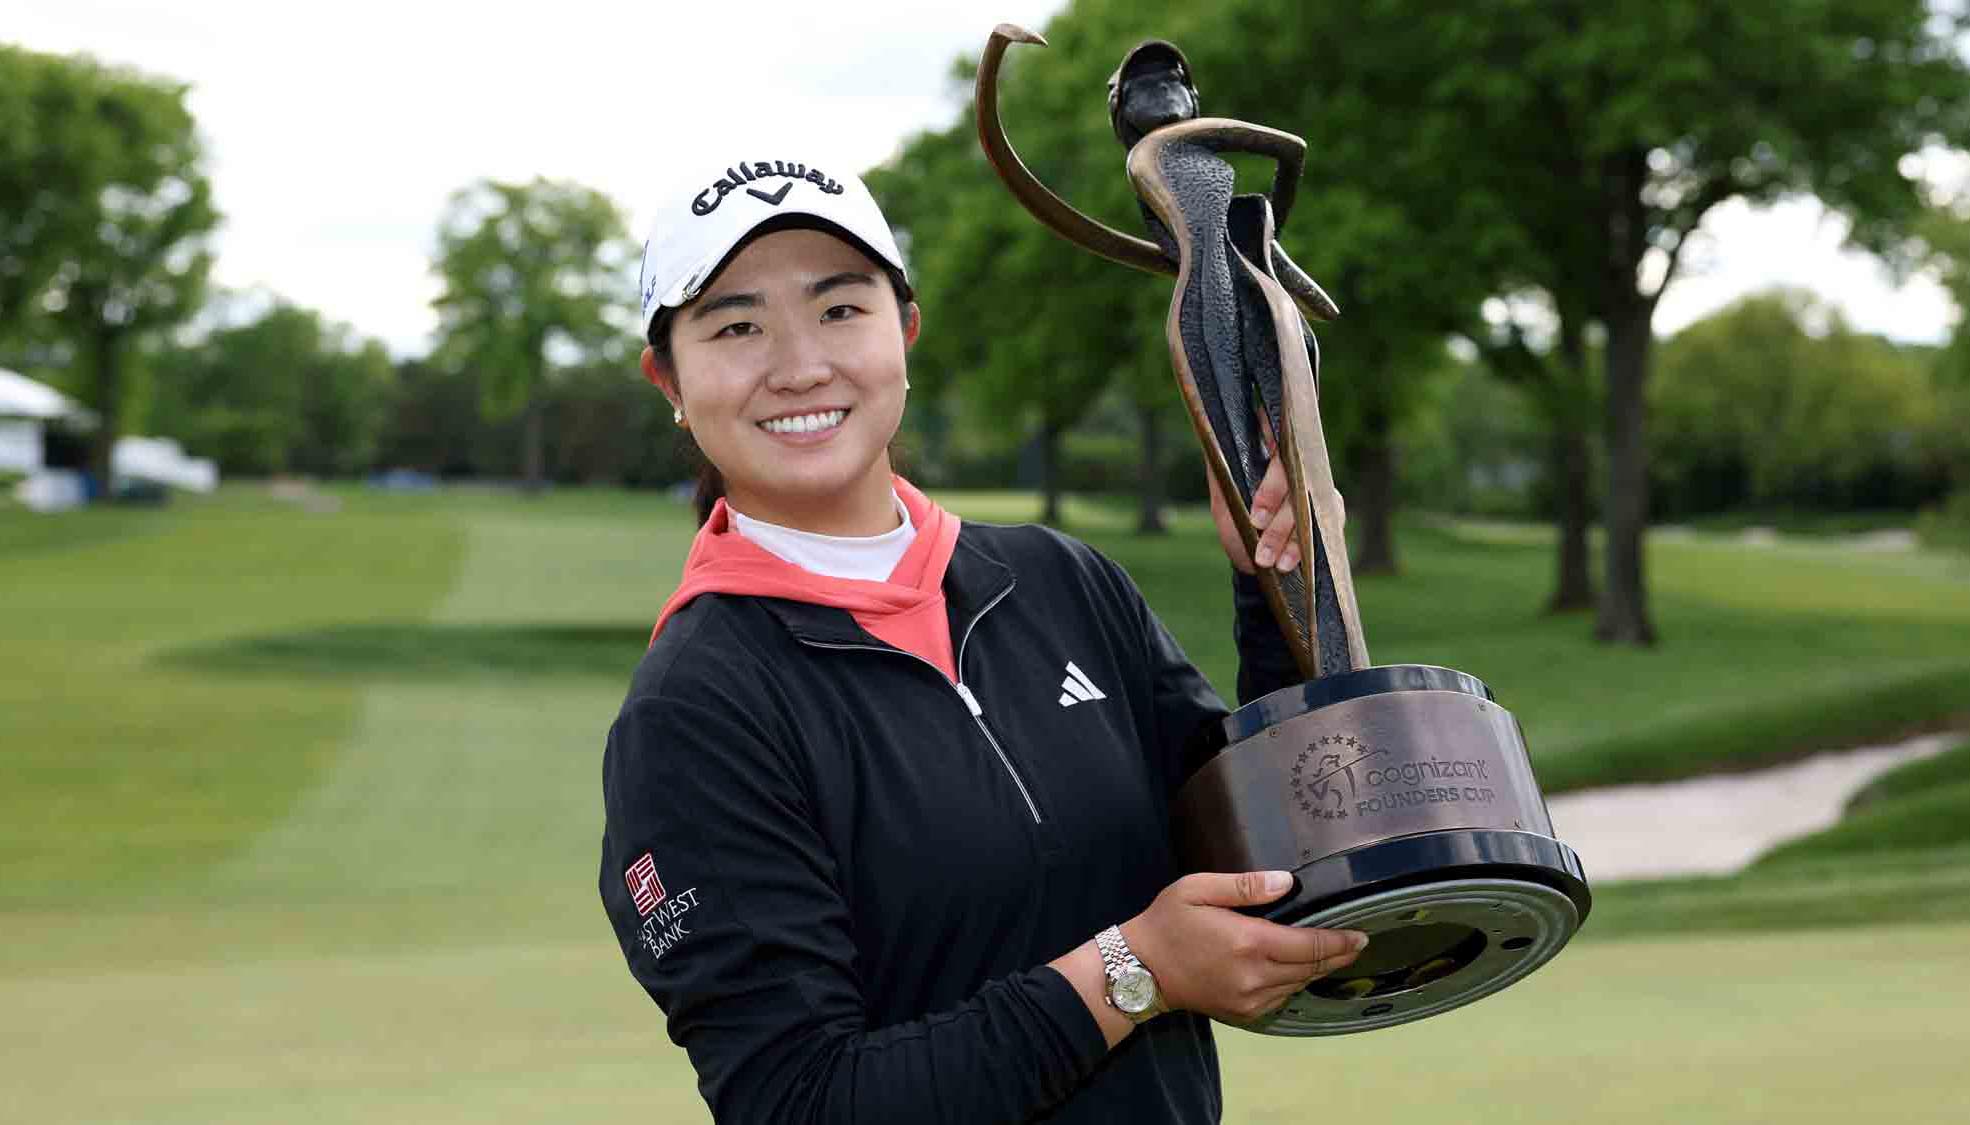 ROSE ZHANG MAKES LATE RUN TO CAPTURE SECOND LPGA TOUR VICTORY AT COGNIZANT FOUNDERS CUP